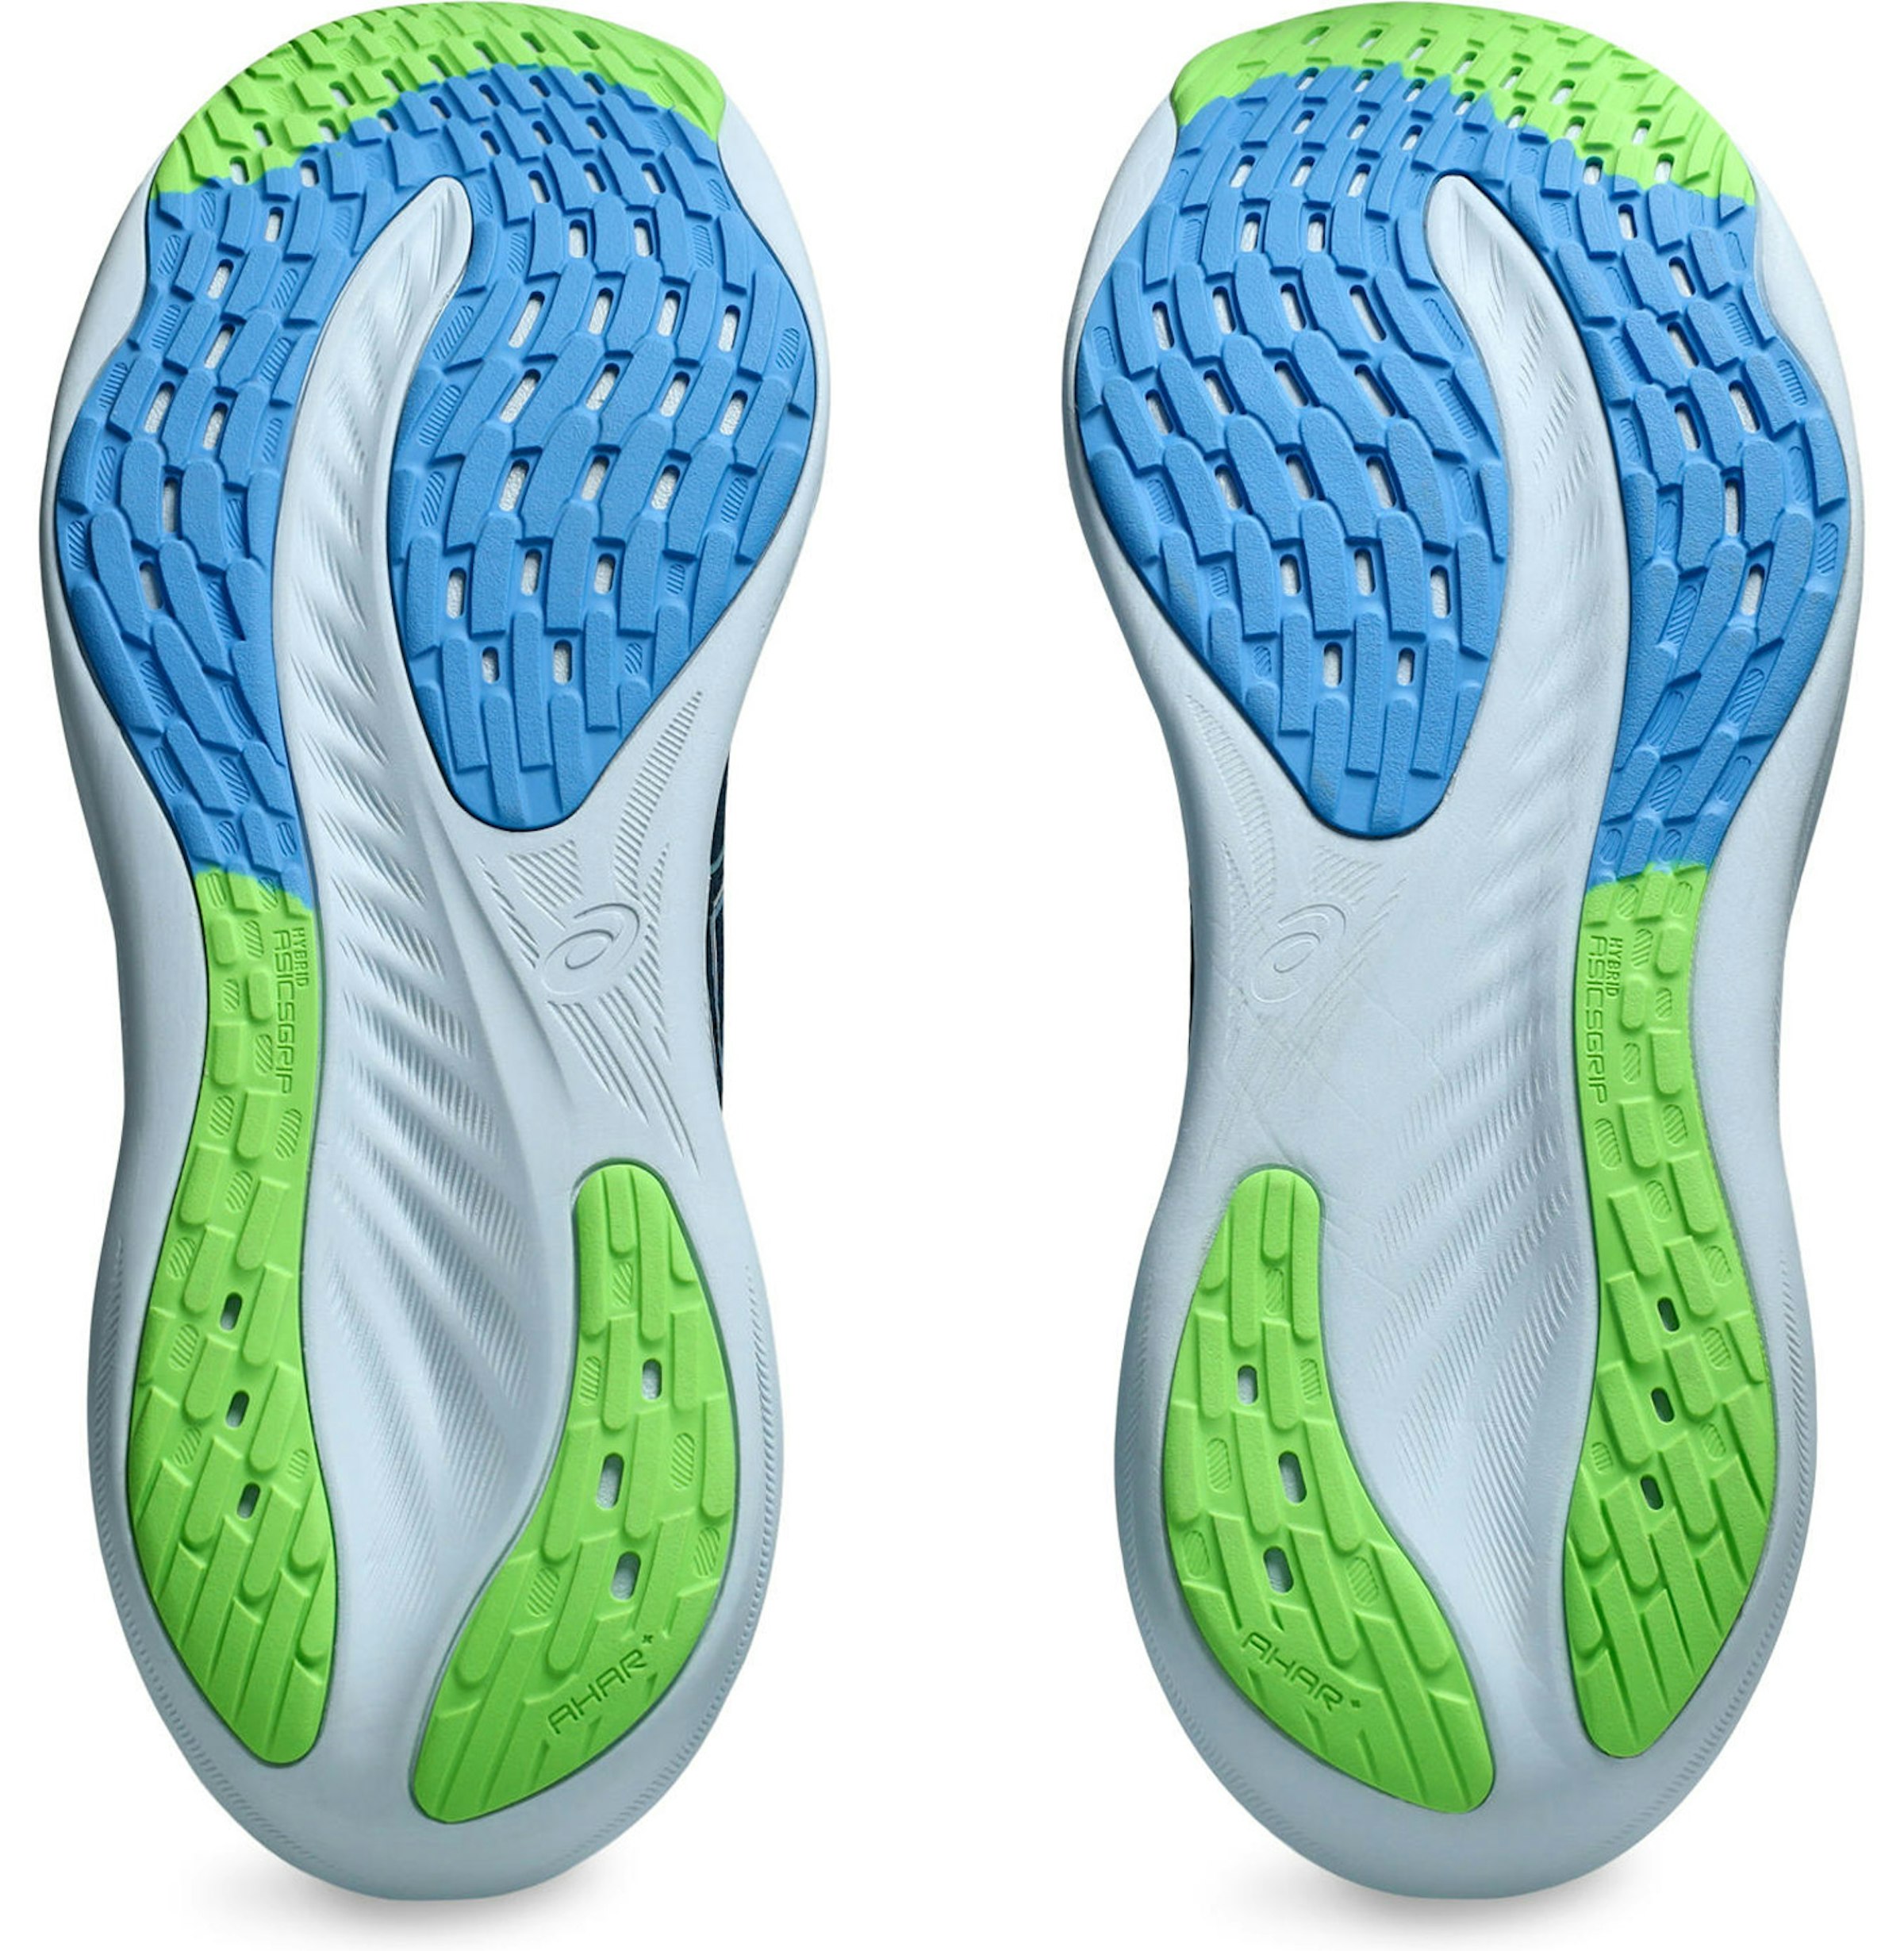 The outsole is connected on the little toe side. The blue part is the high-grip ASICSGRIP, and the green part is the abrasion-resistant AHARPLUS.